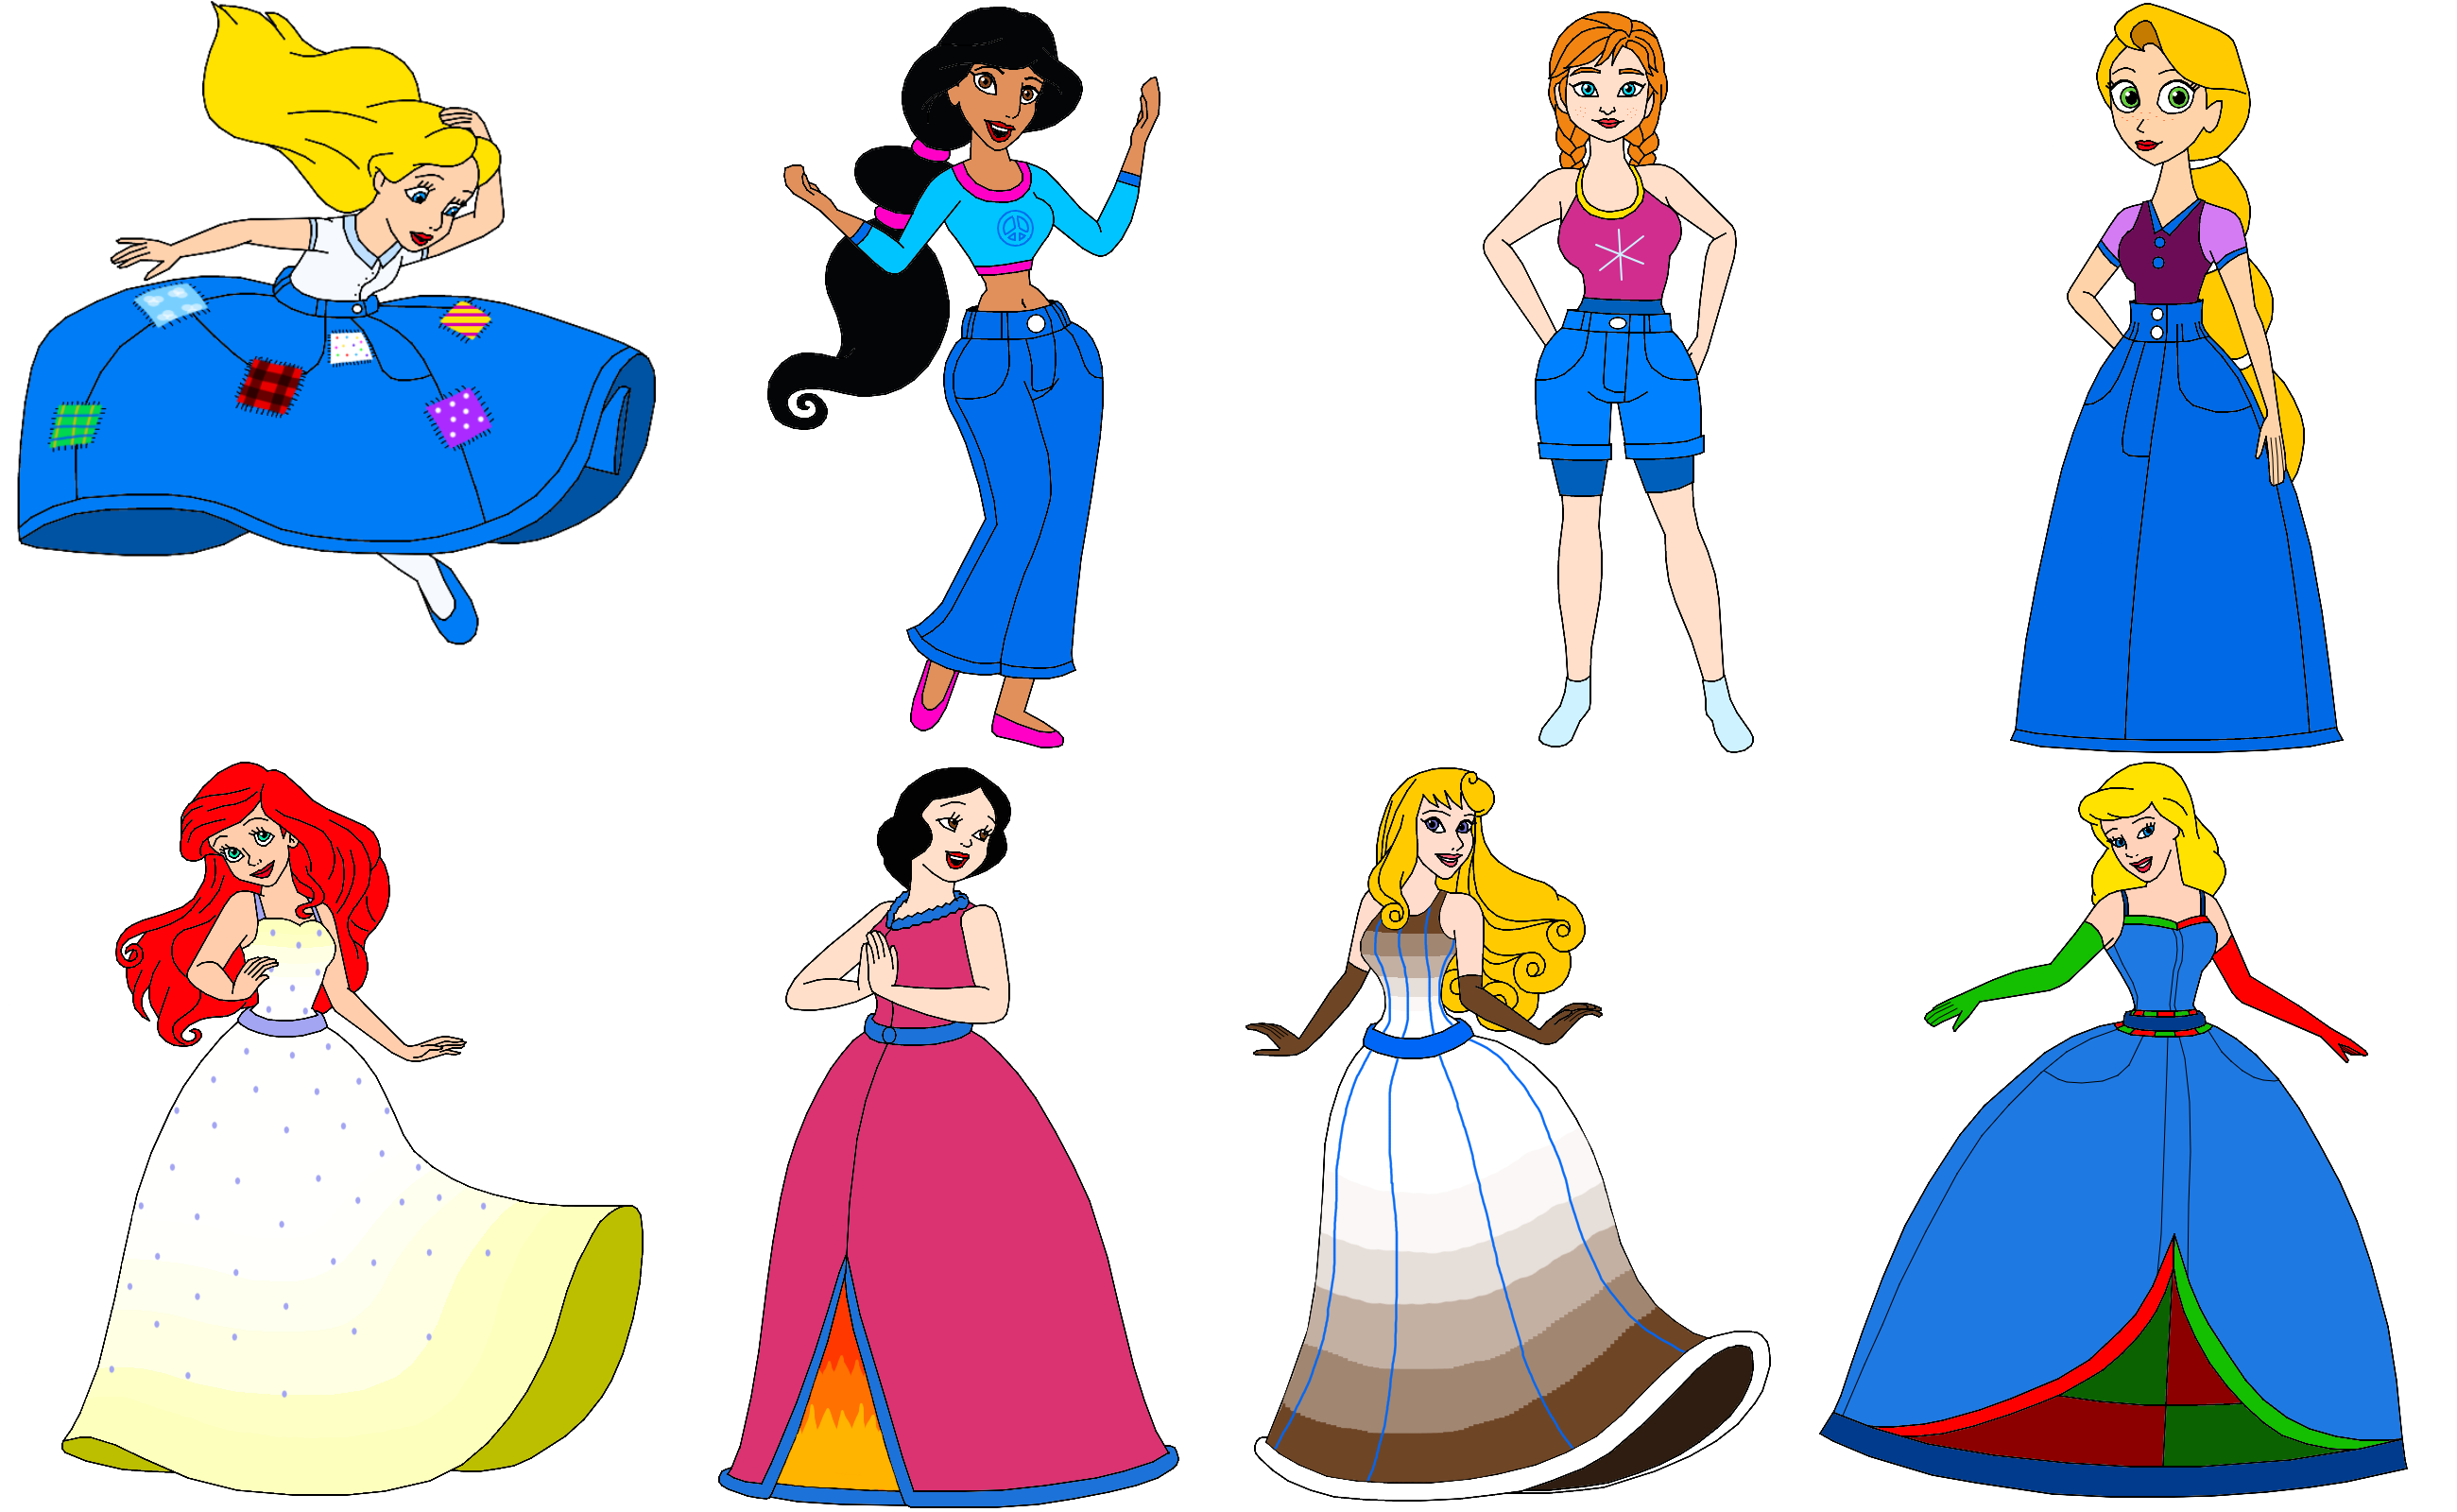 Disney women in their new outfits by Aiai4948 on DeviantArt